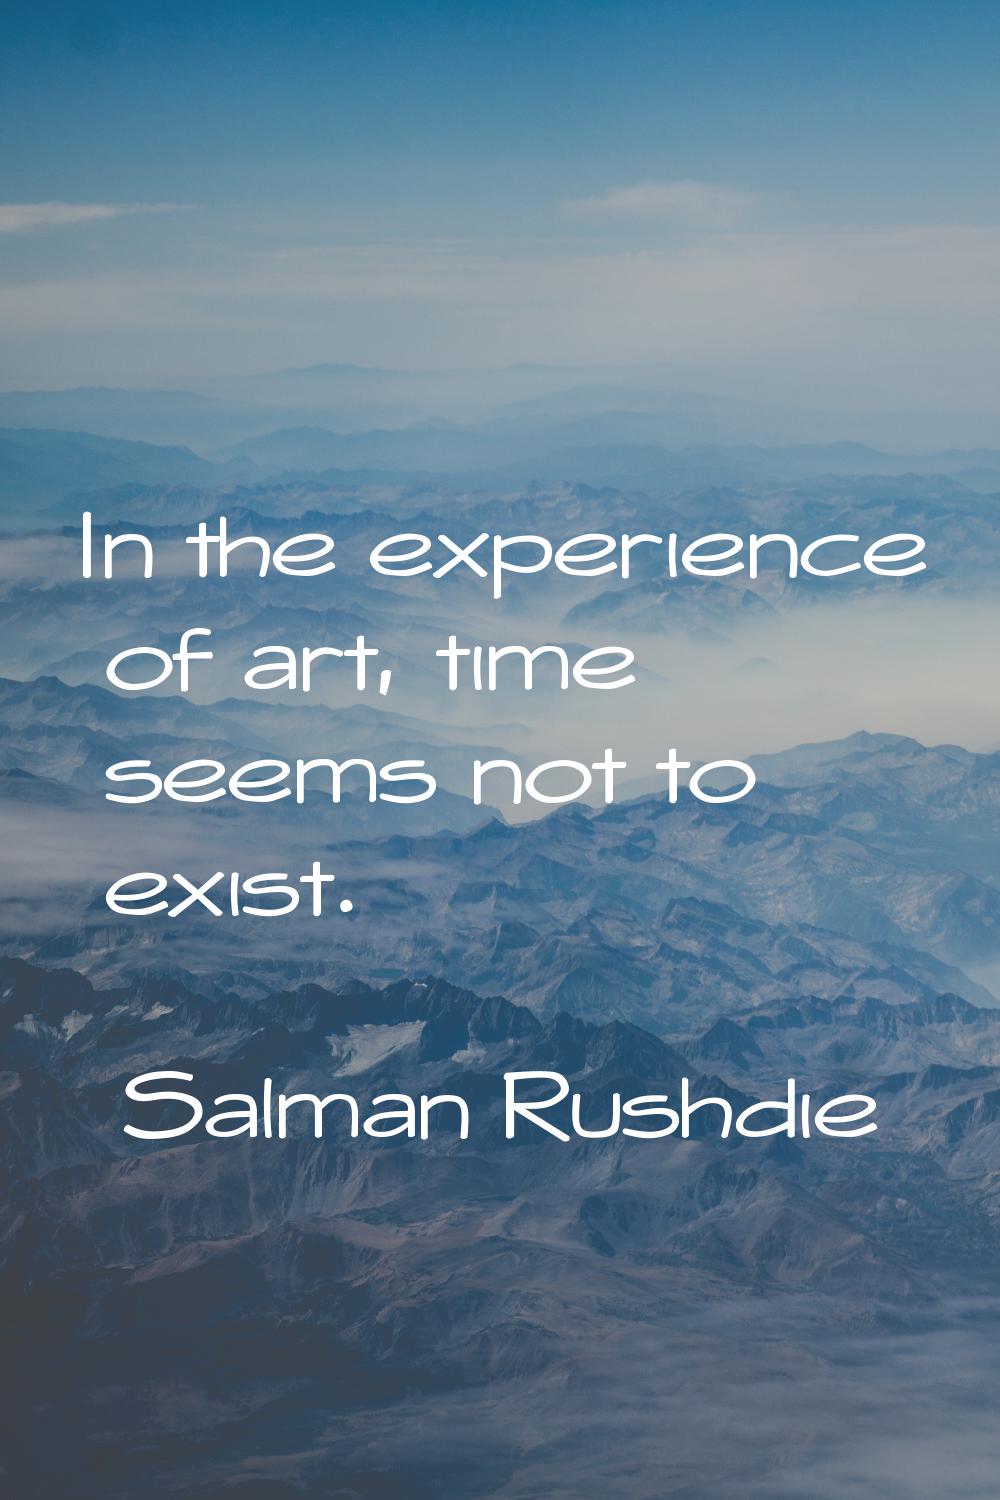 In the experience of art, time seems not to exist.